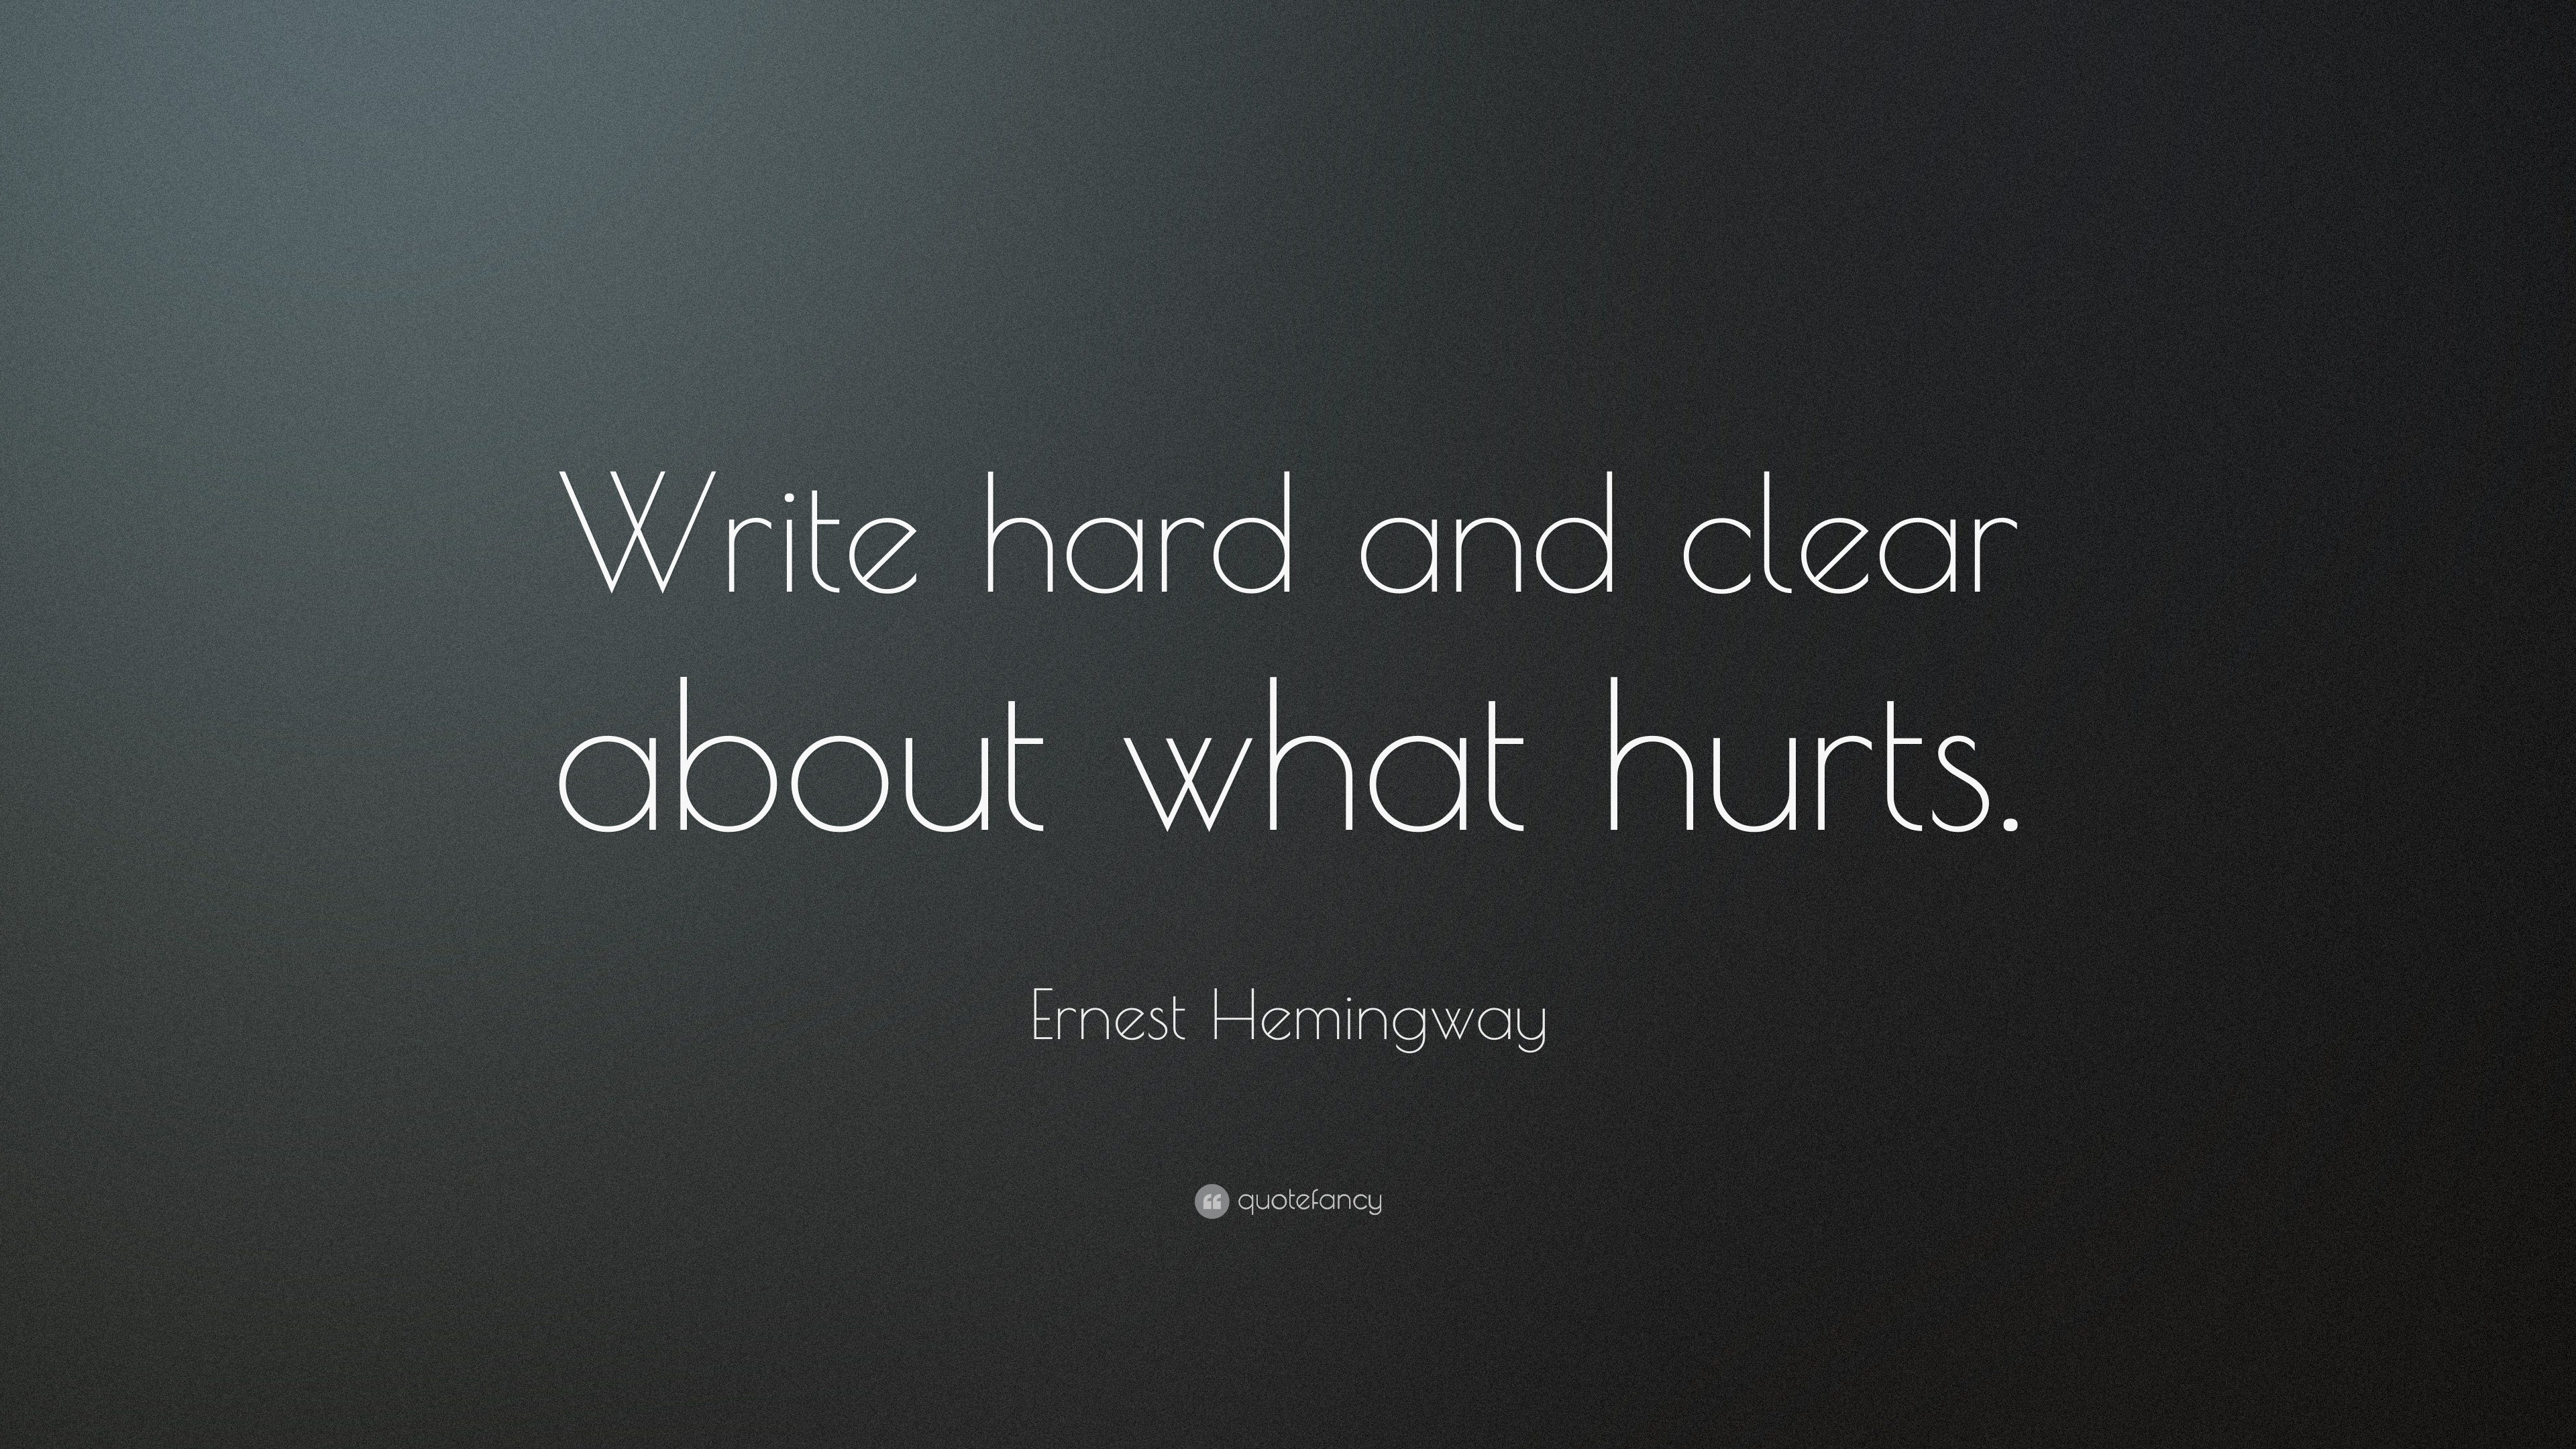 Ernest Hemingway Quote: “Write Hard And Clear About What Hurts. ”